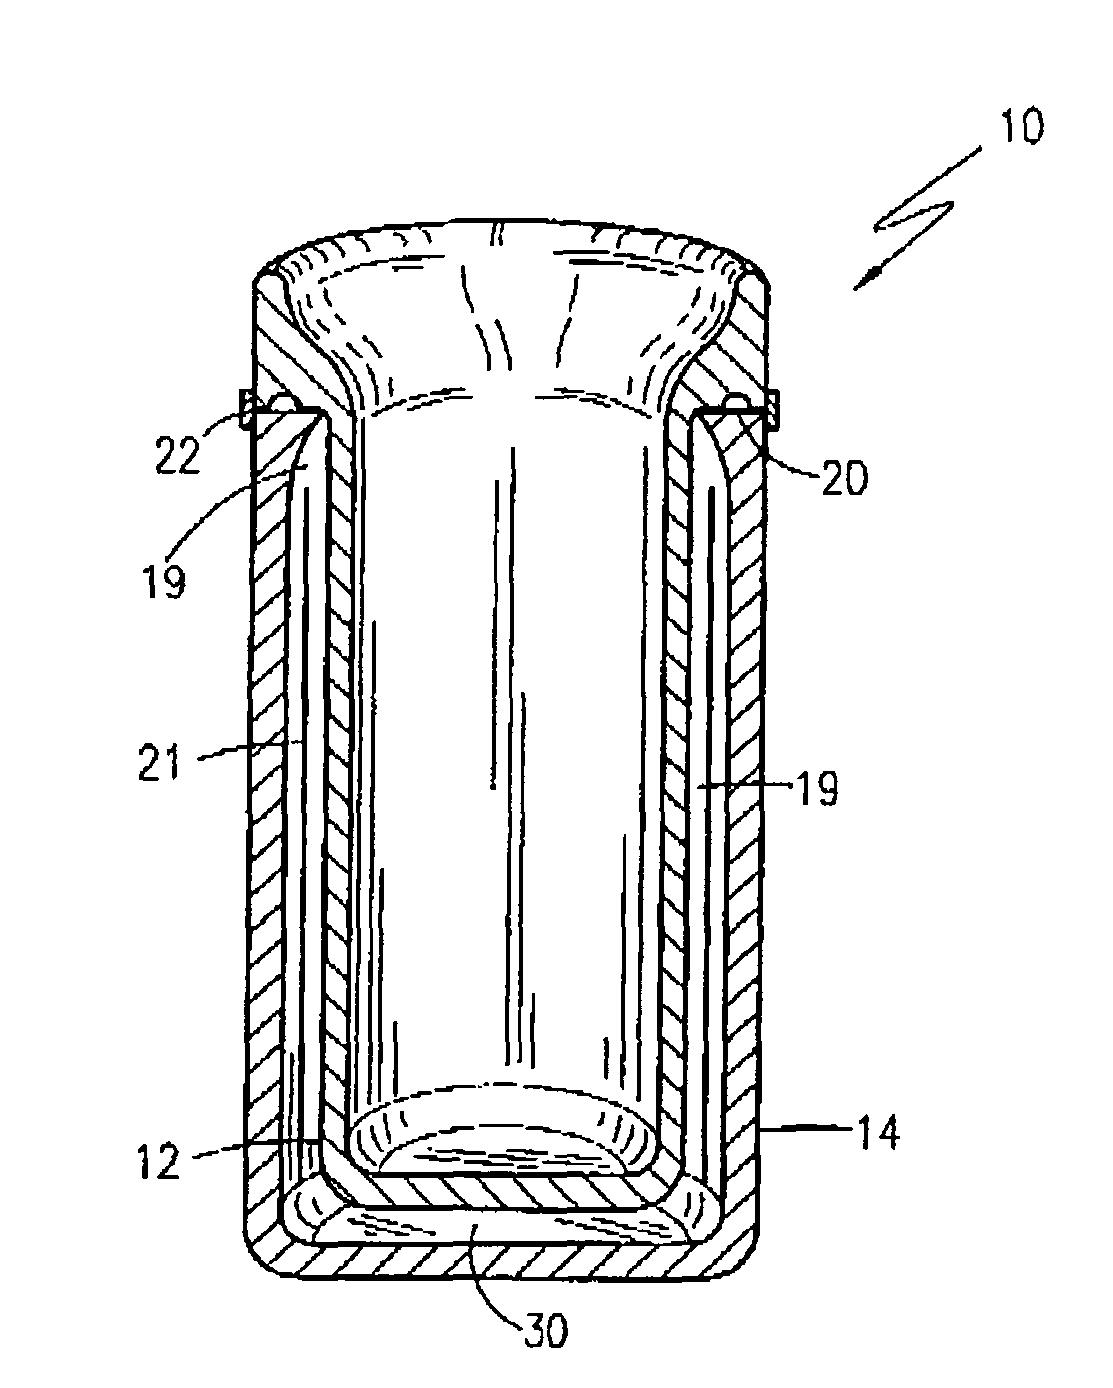 Method for manufacturing a thermally insulated drinking glass or glass bottle